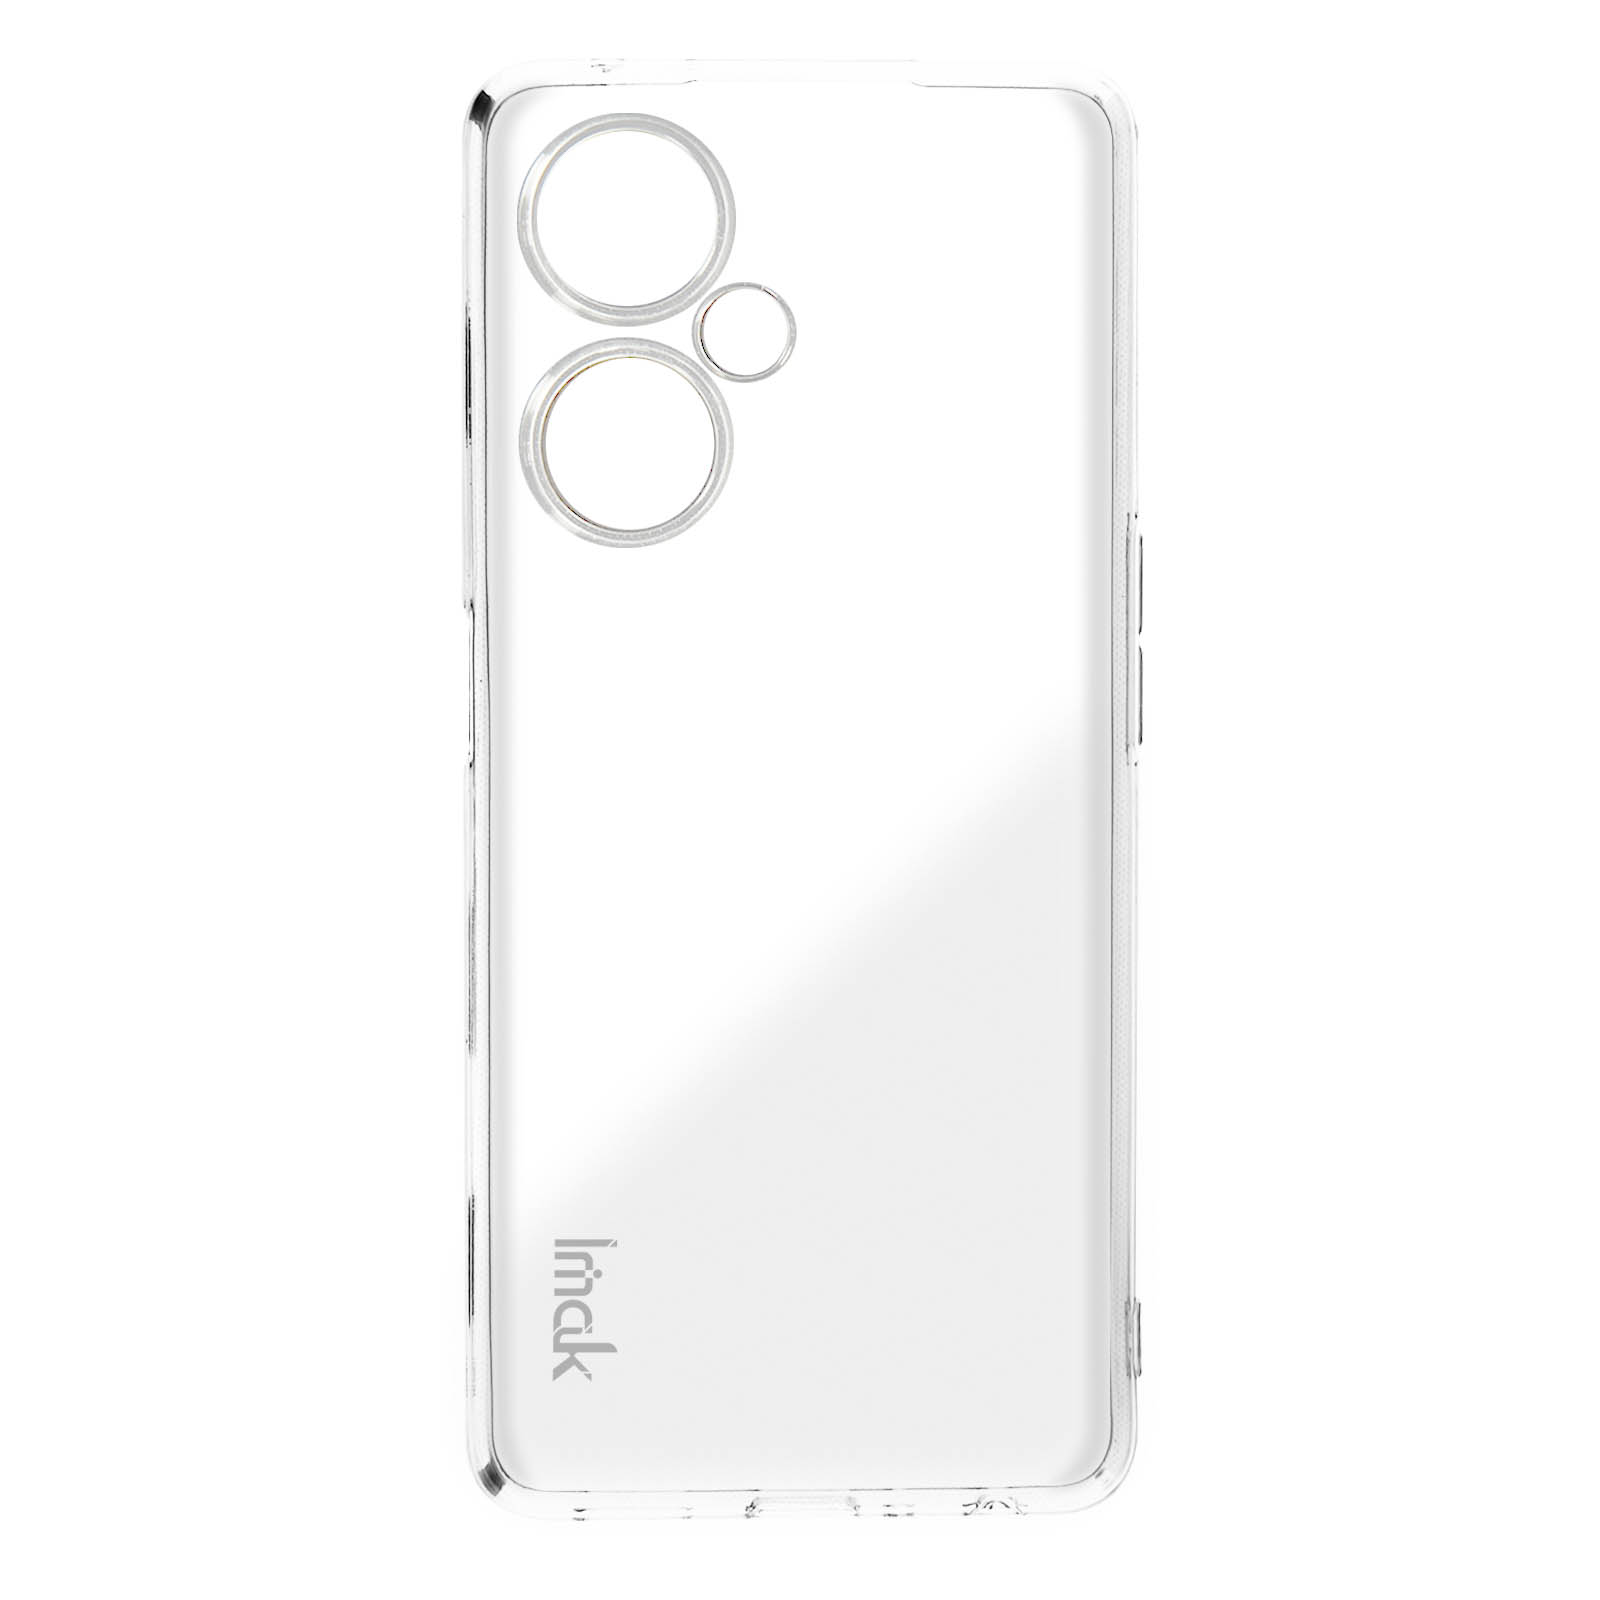 IMAK UX-5 CE Nord Lite Transparent Series, 5G, 3 OnePlus, Backcover